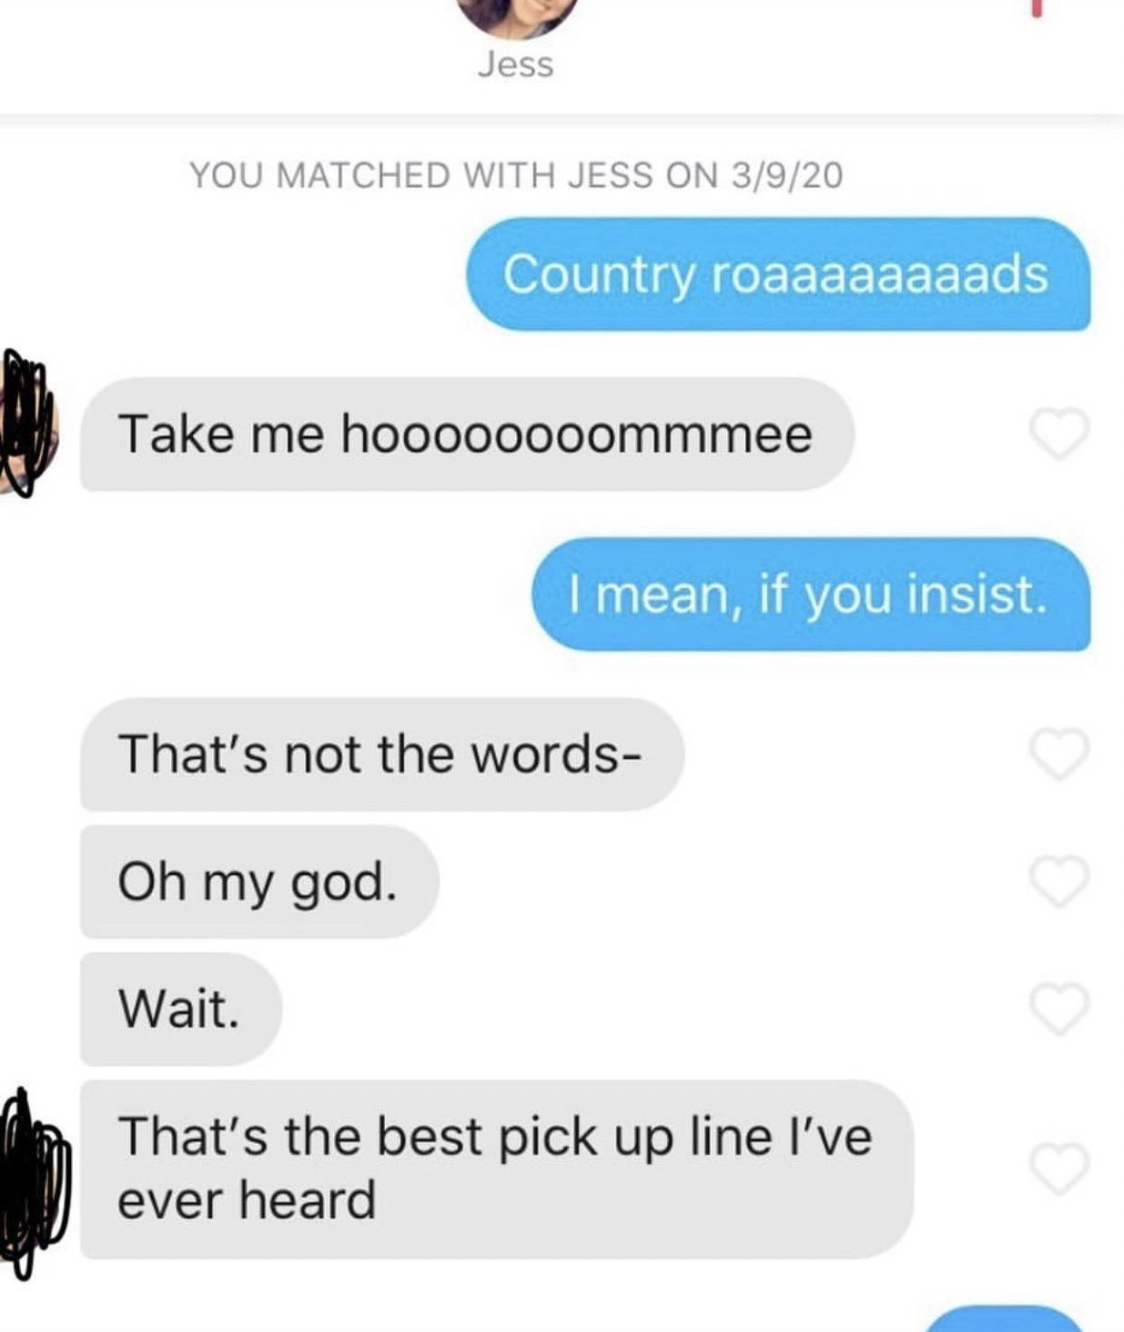 multimedia - Jess You Matched With Jess On 3920 Country roaaaaaaaads Take me hoooooooommmee Wait. I mean, if you insist. That's not the words Oh my god. That's the best pick up line I've ever heard